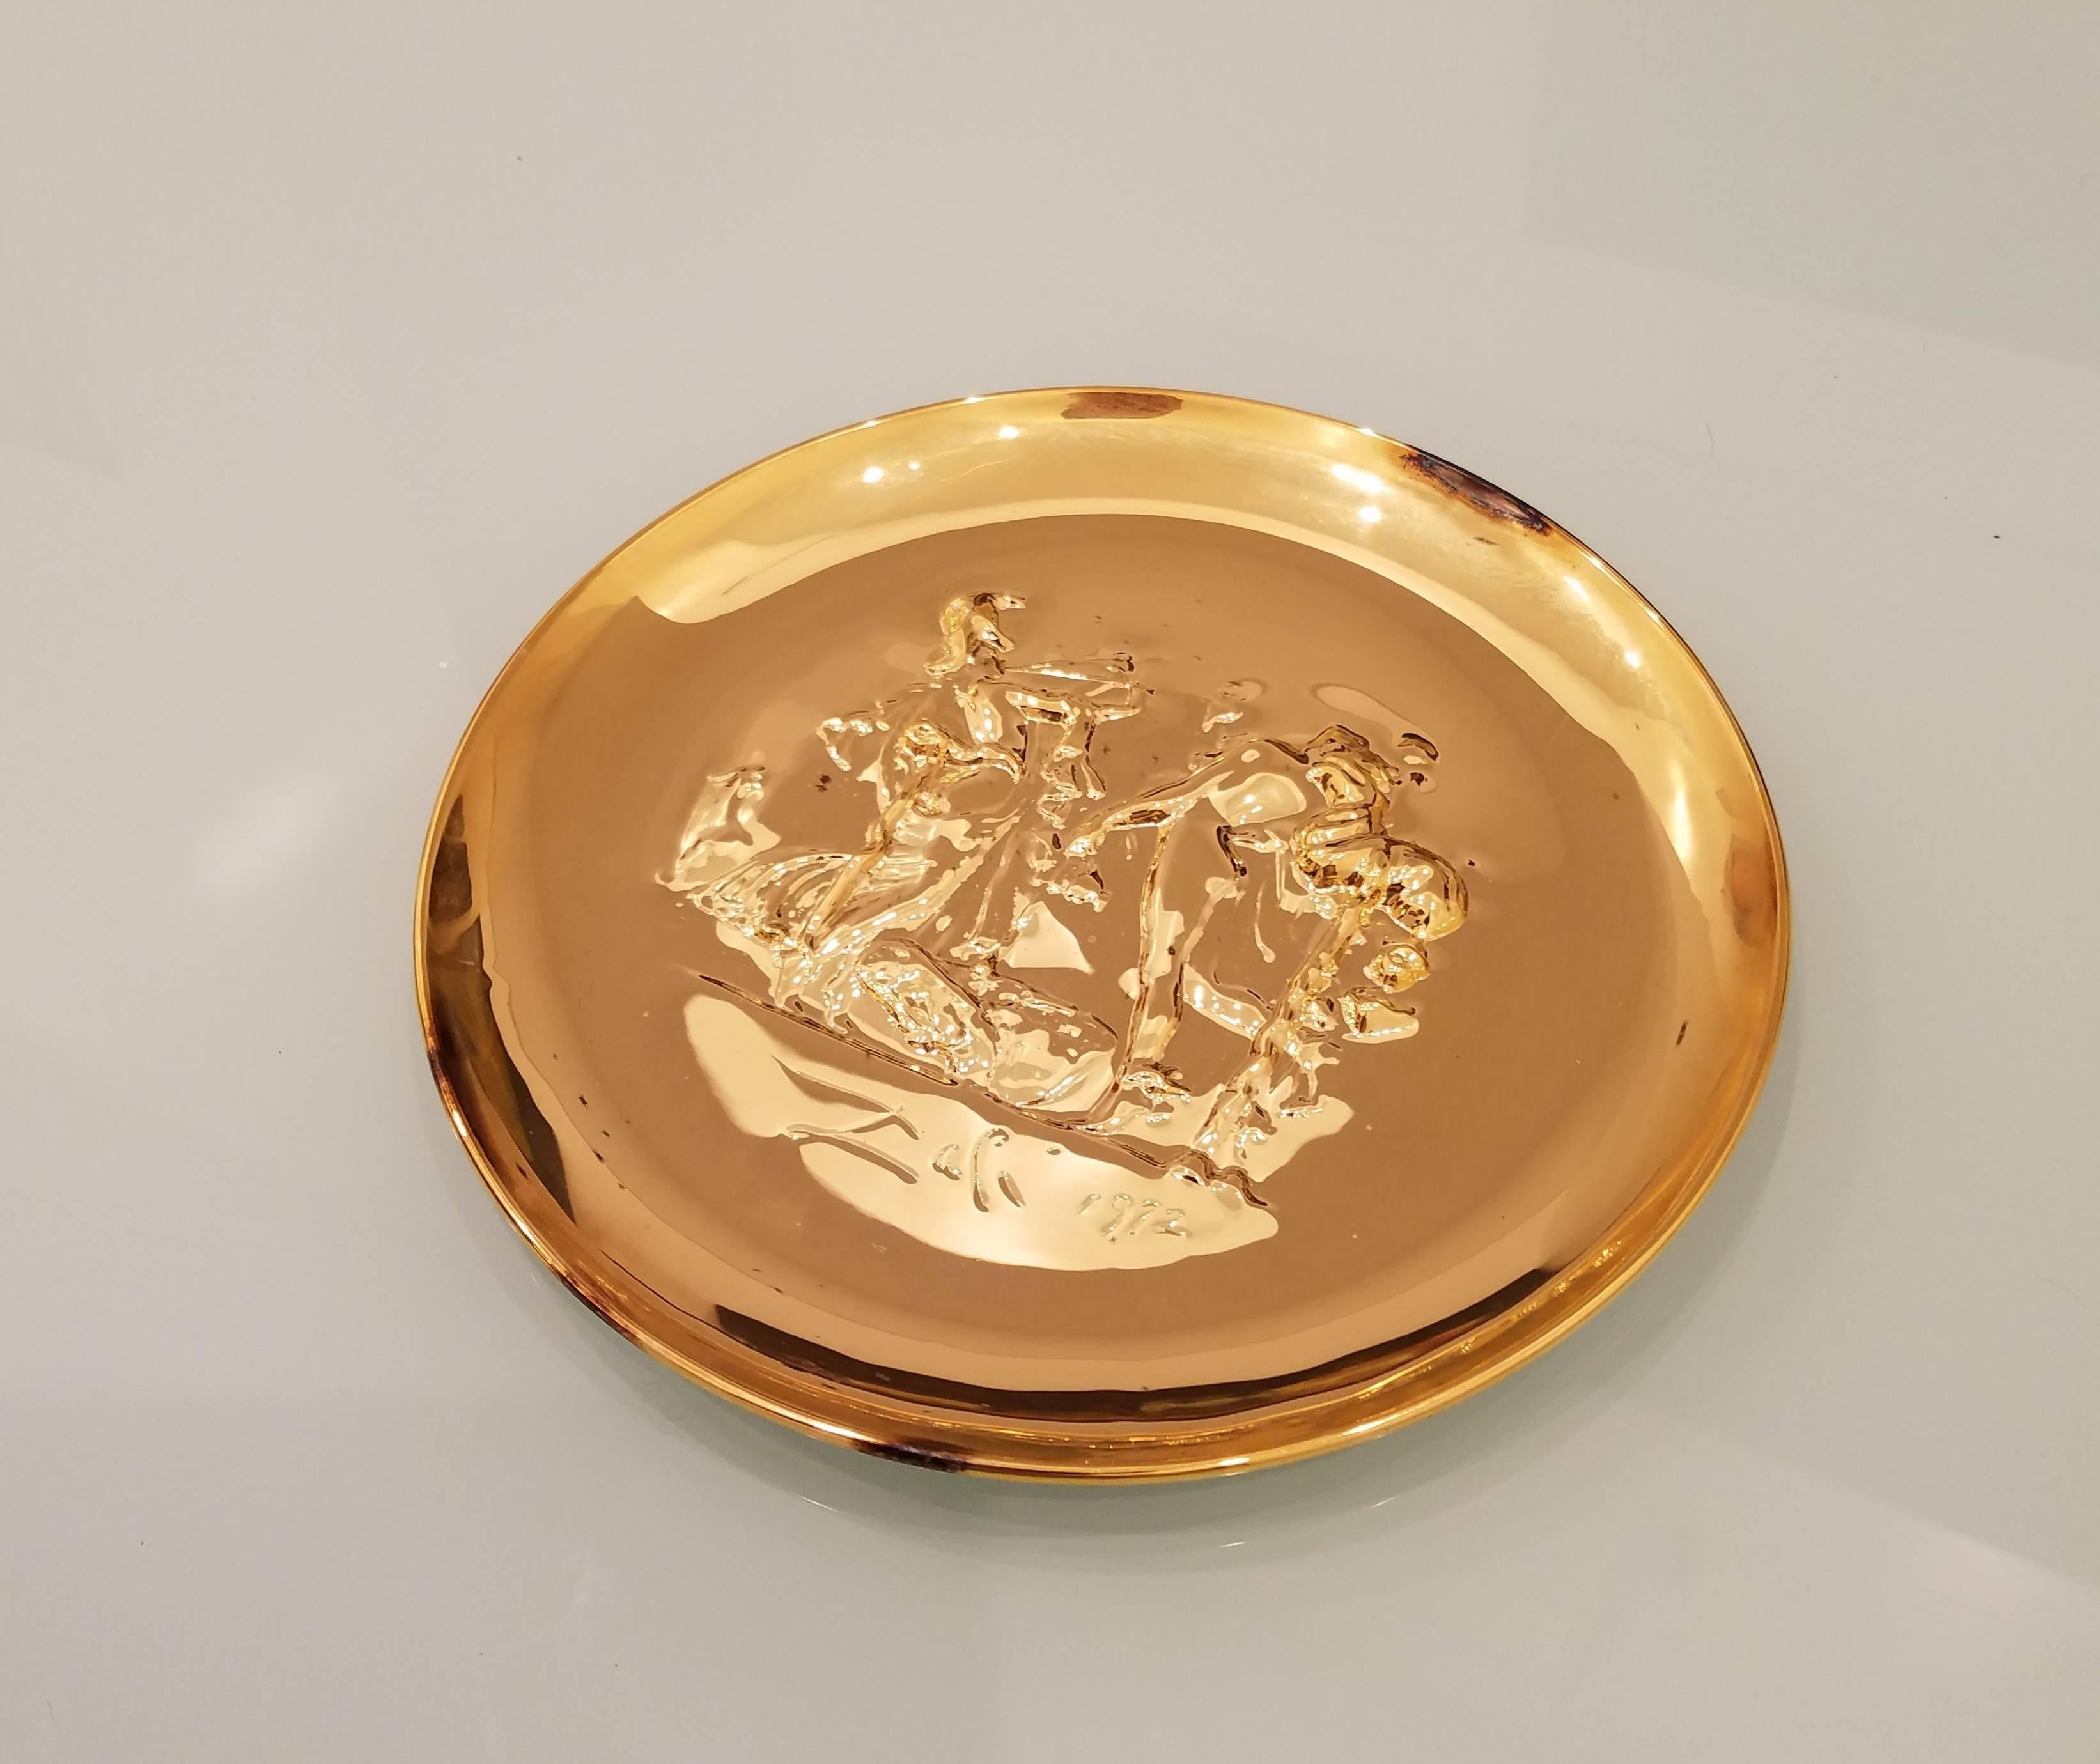 Very collectible and rare decorative plate, in sterling silver by SalvadorDali for the Lincoln Mint stamped and numbered, this piece was found in its original plastic wrap, the gold finish its due to age the piece has not been touched, it shows some